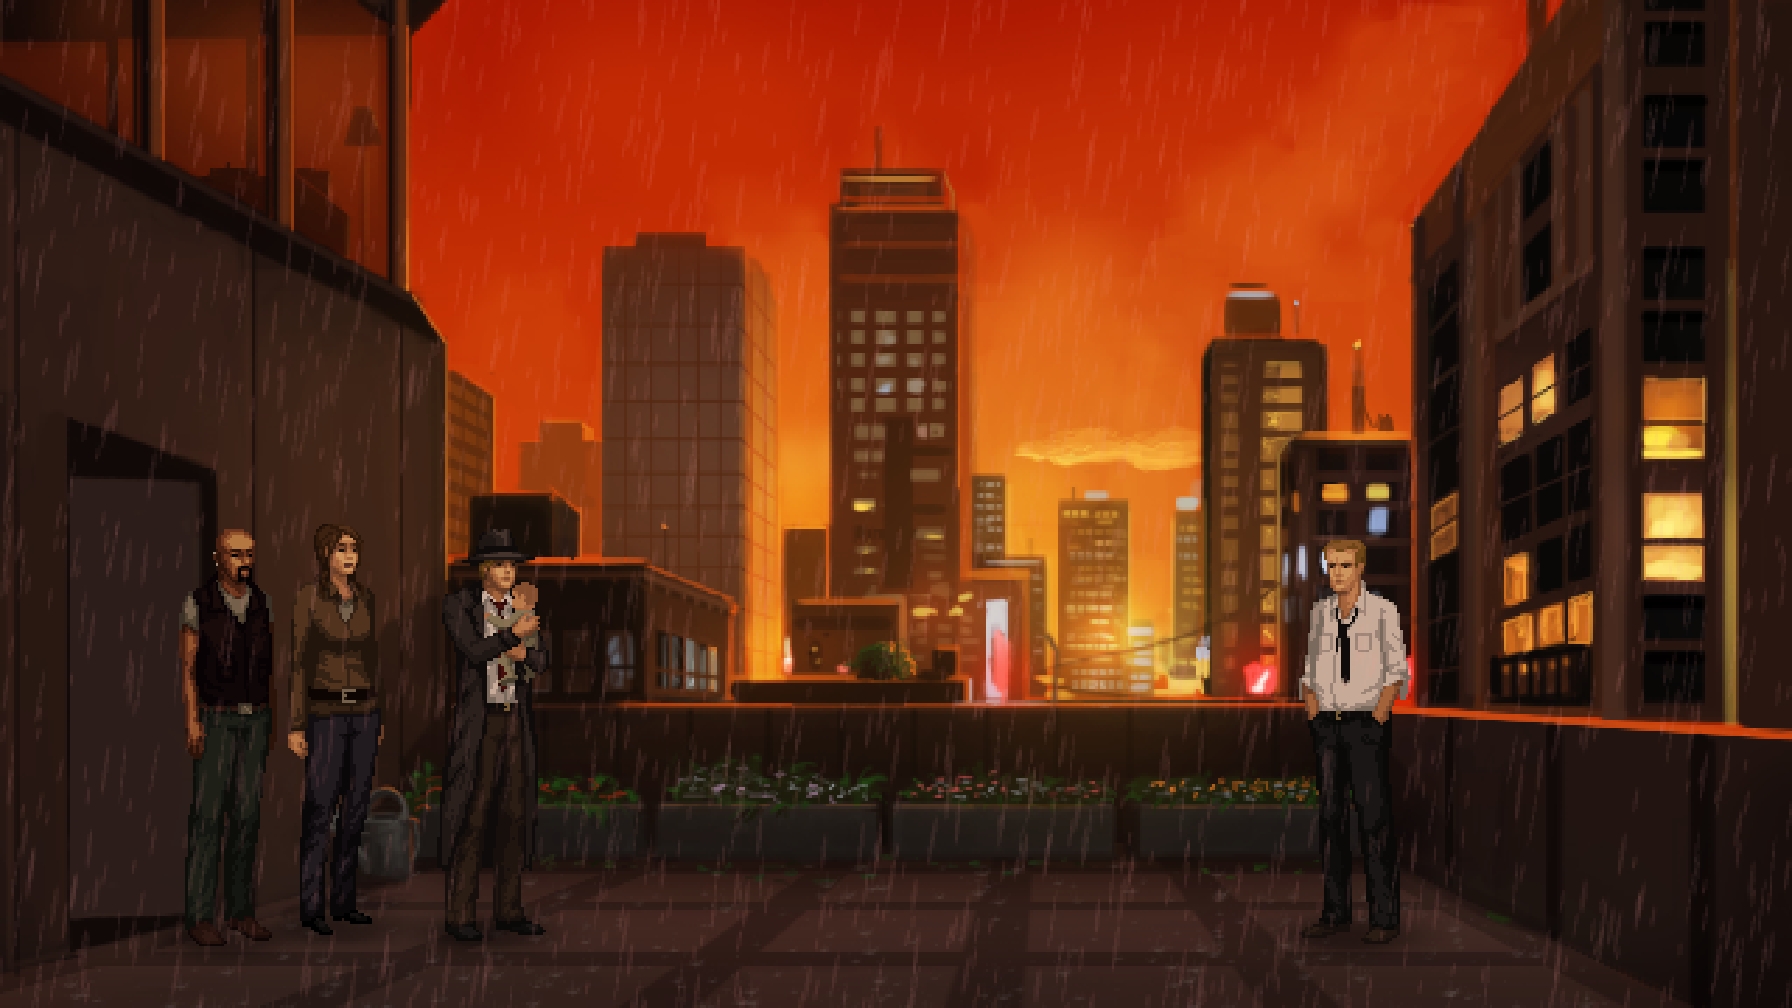 Sunset Rooftop Screenshot from Unavowed